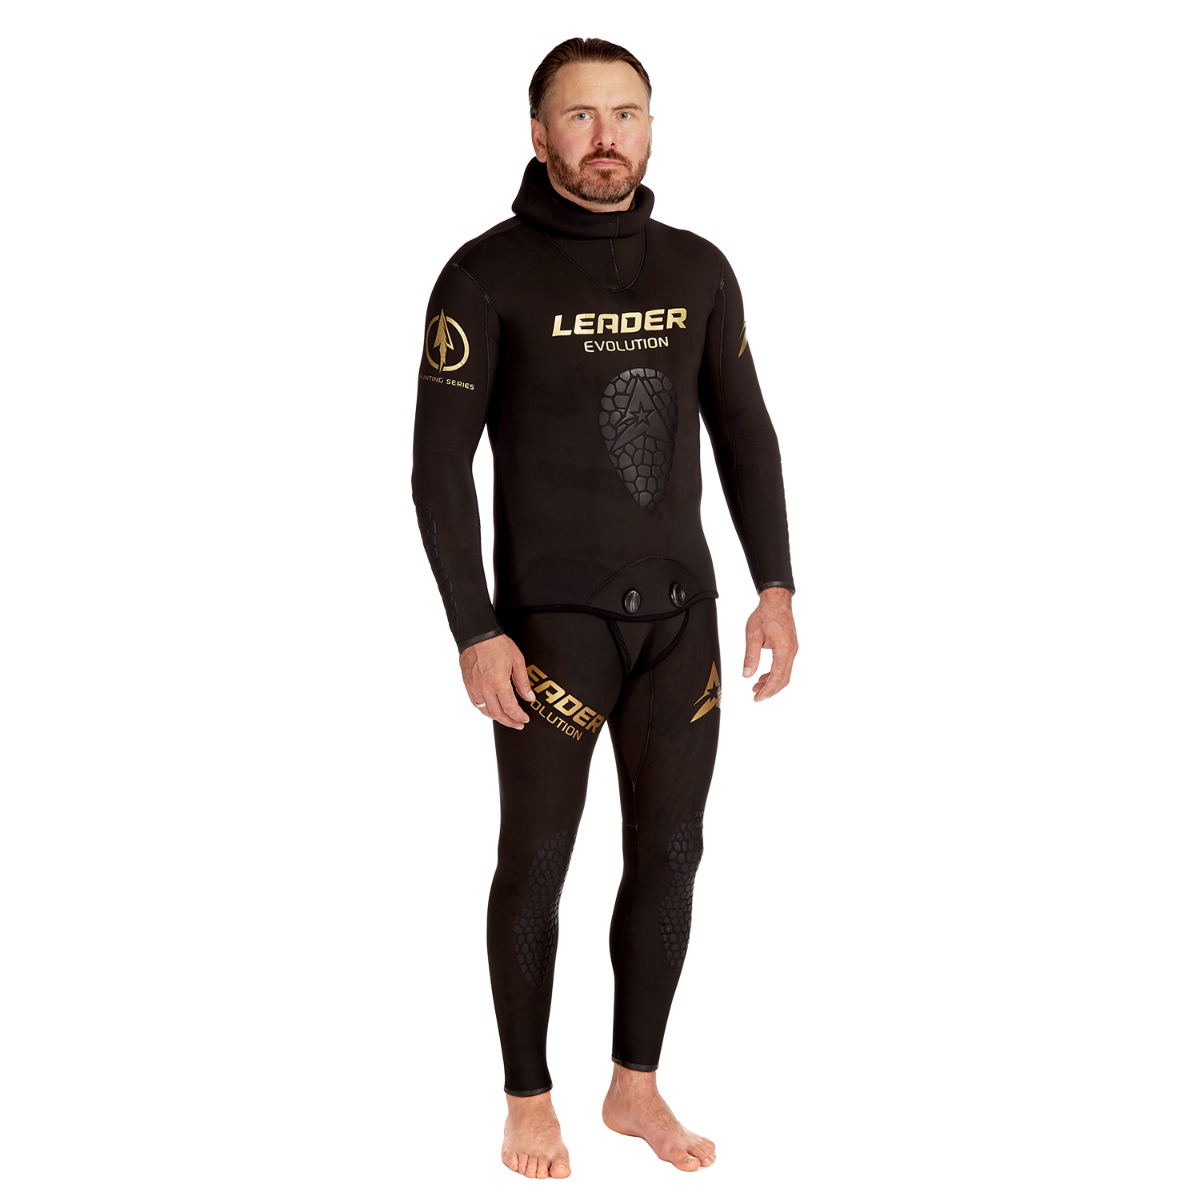 https://www.leaderfins.com/media/catalog/product/cache/aef1cd55a9840150c0db65a822948784/l/e/leader-evolution-spearfishing-wetsuit-2_1_1_1.png